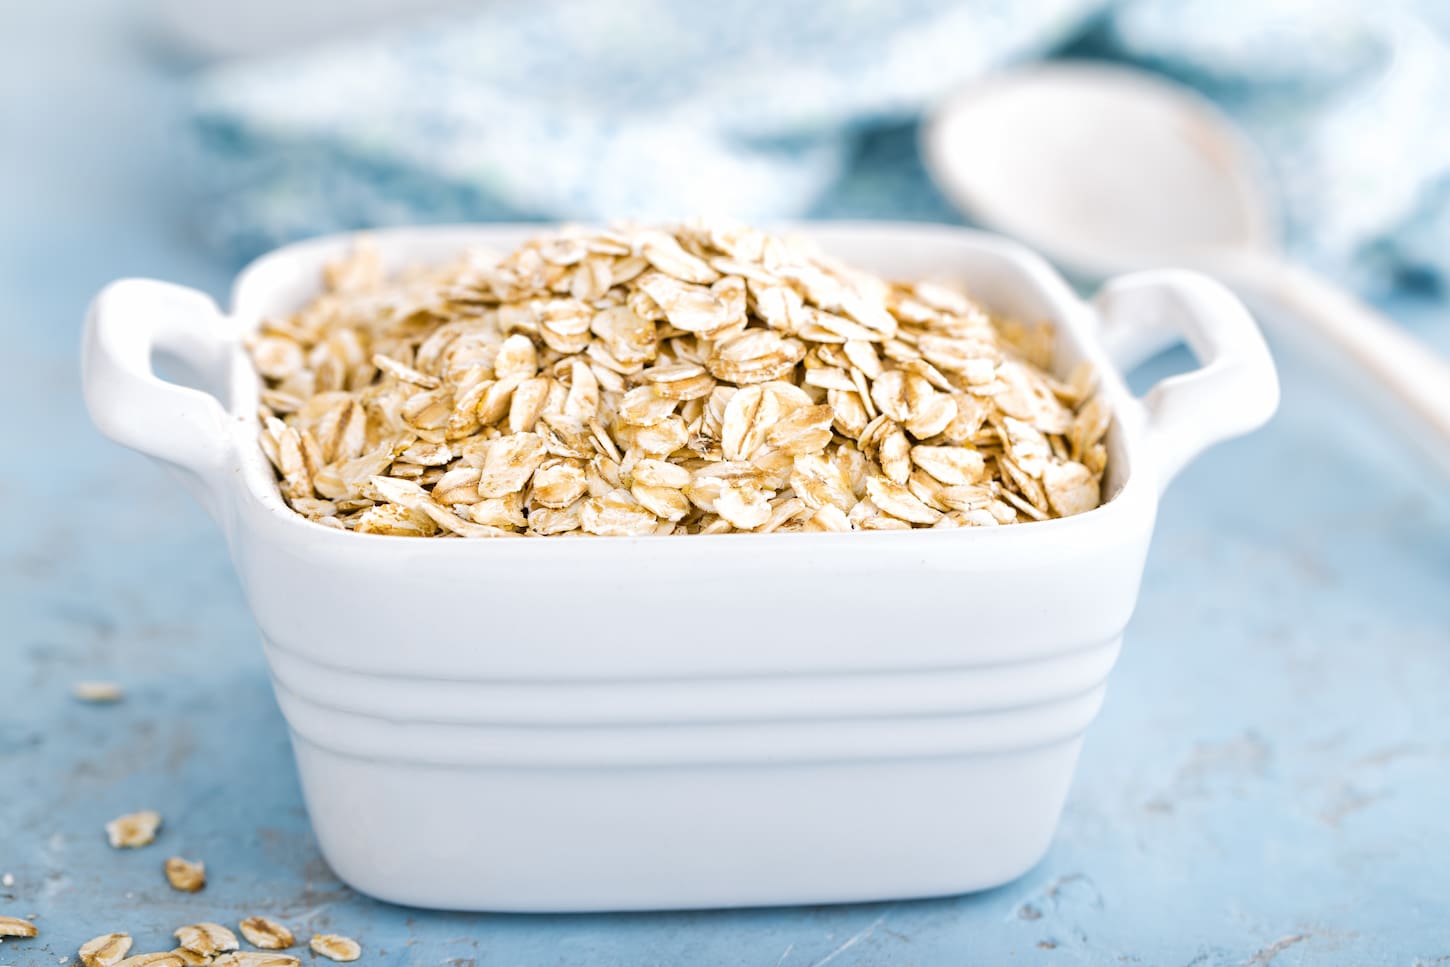 An image of Oat flakes in a white bowl.